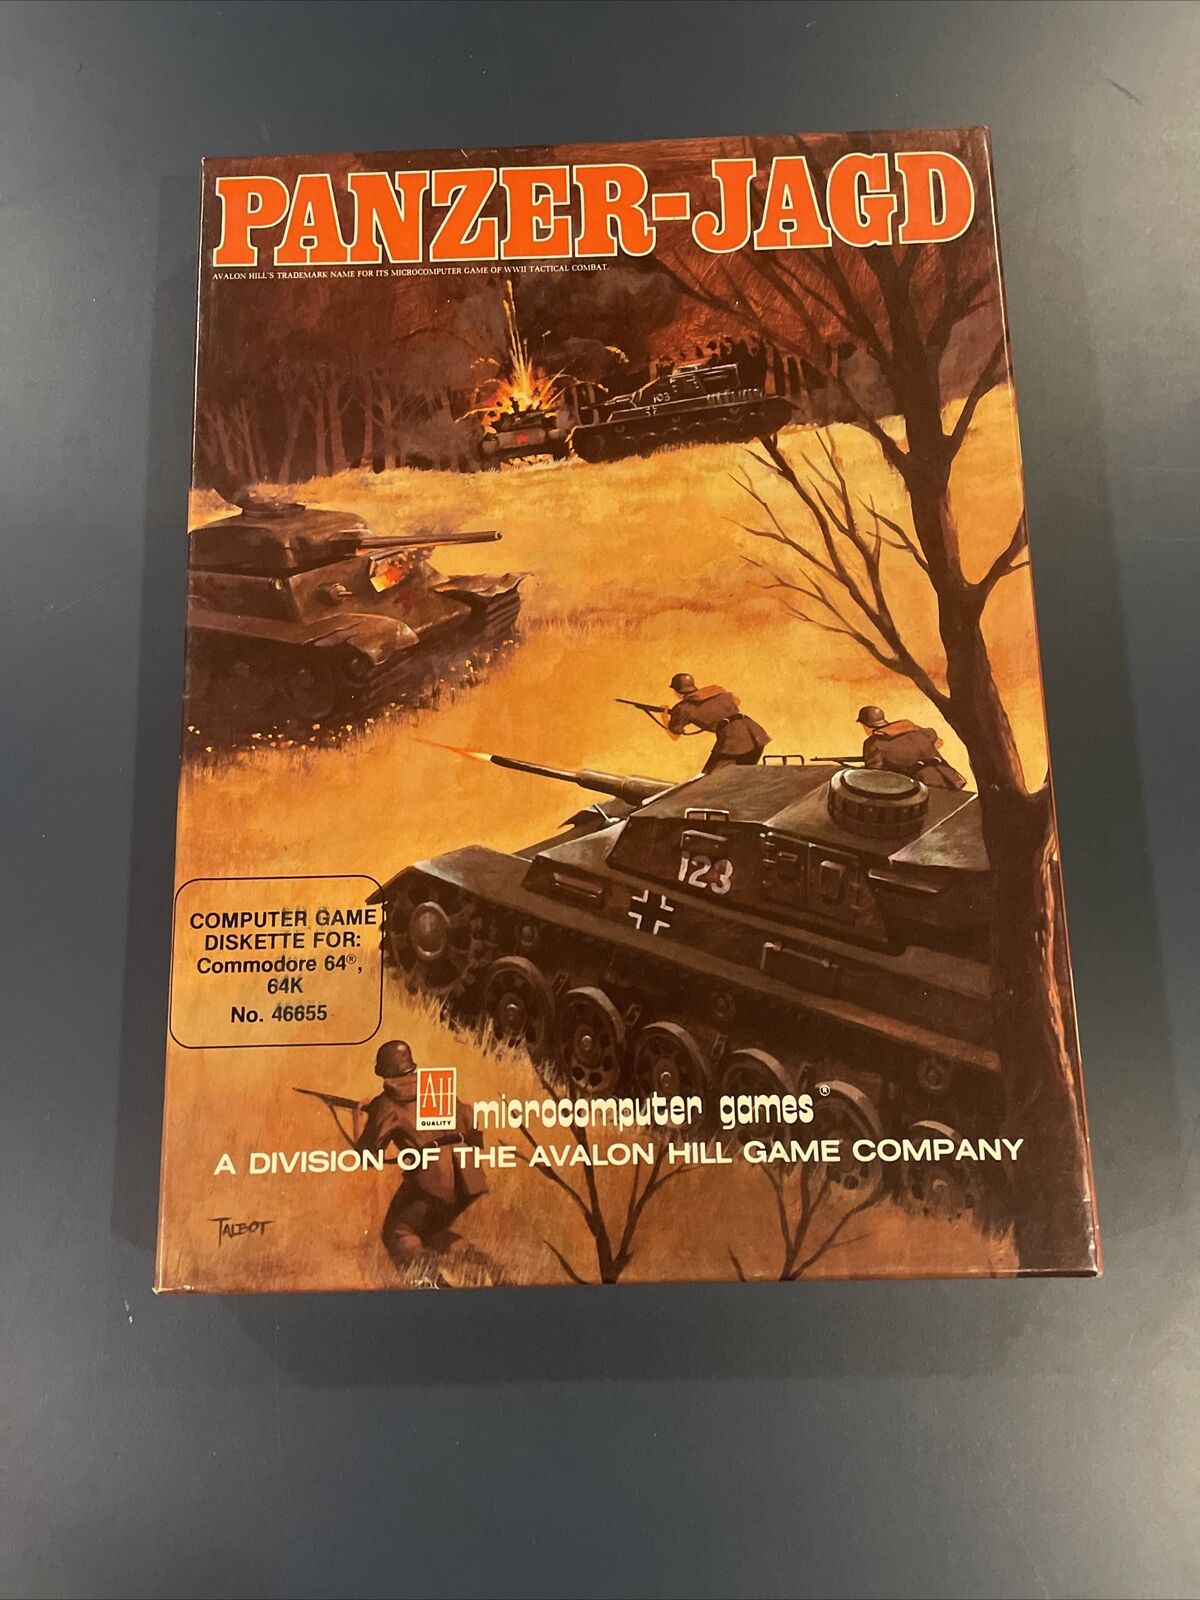 Panzer-Jagd Commodore 64 C64 by Avalon Hill - tested working